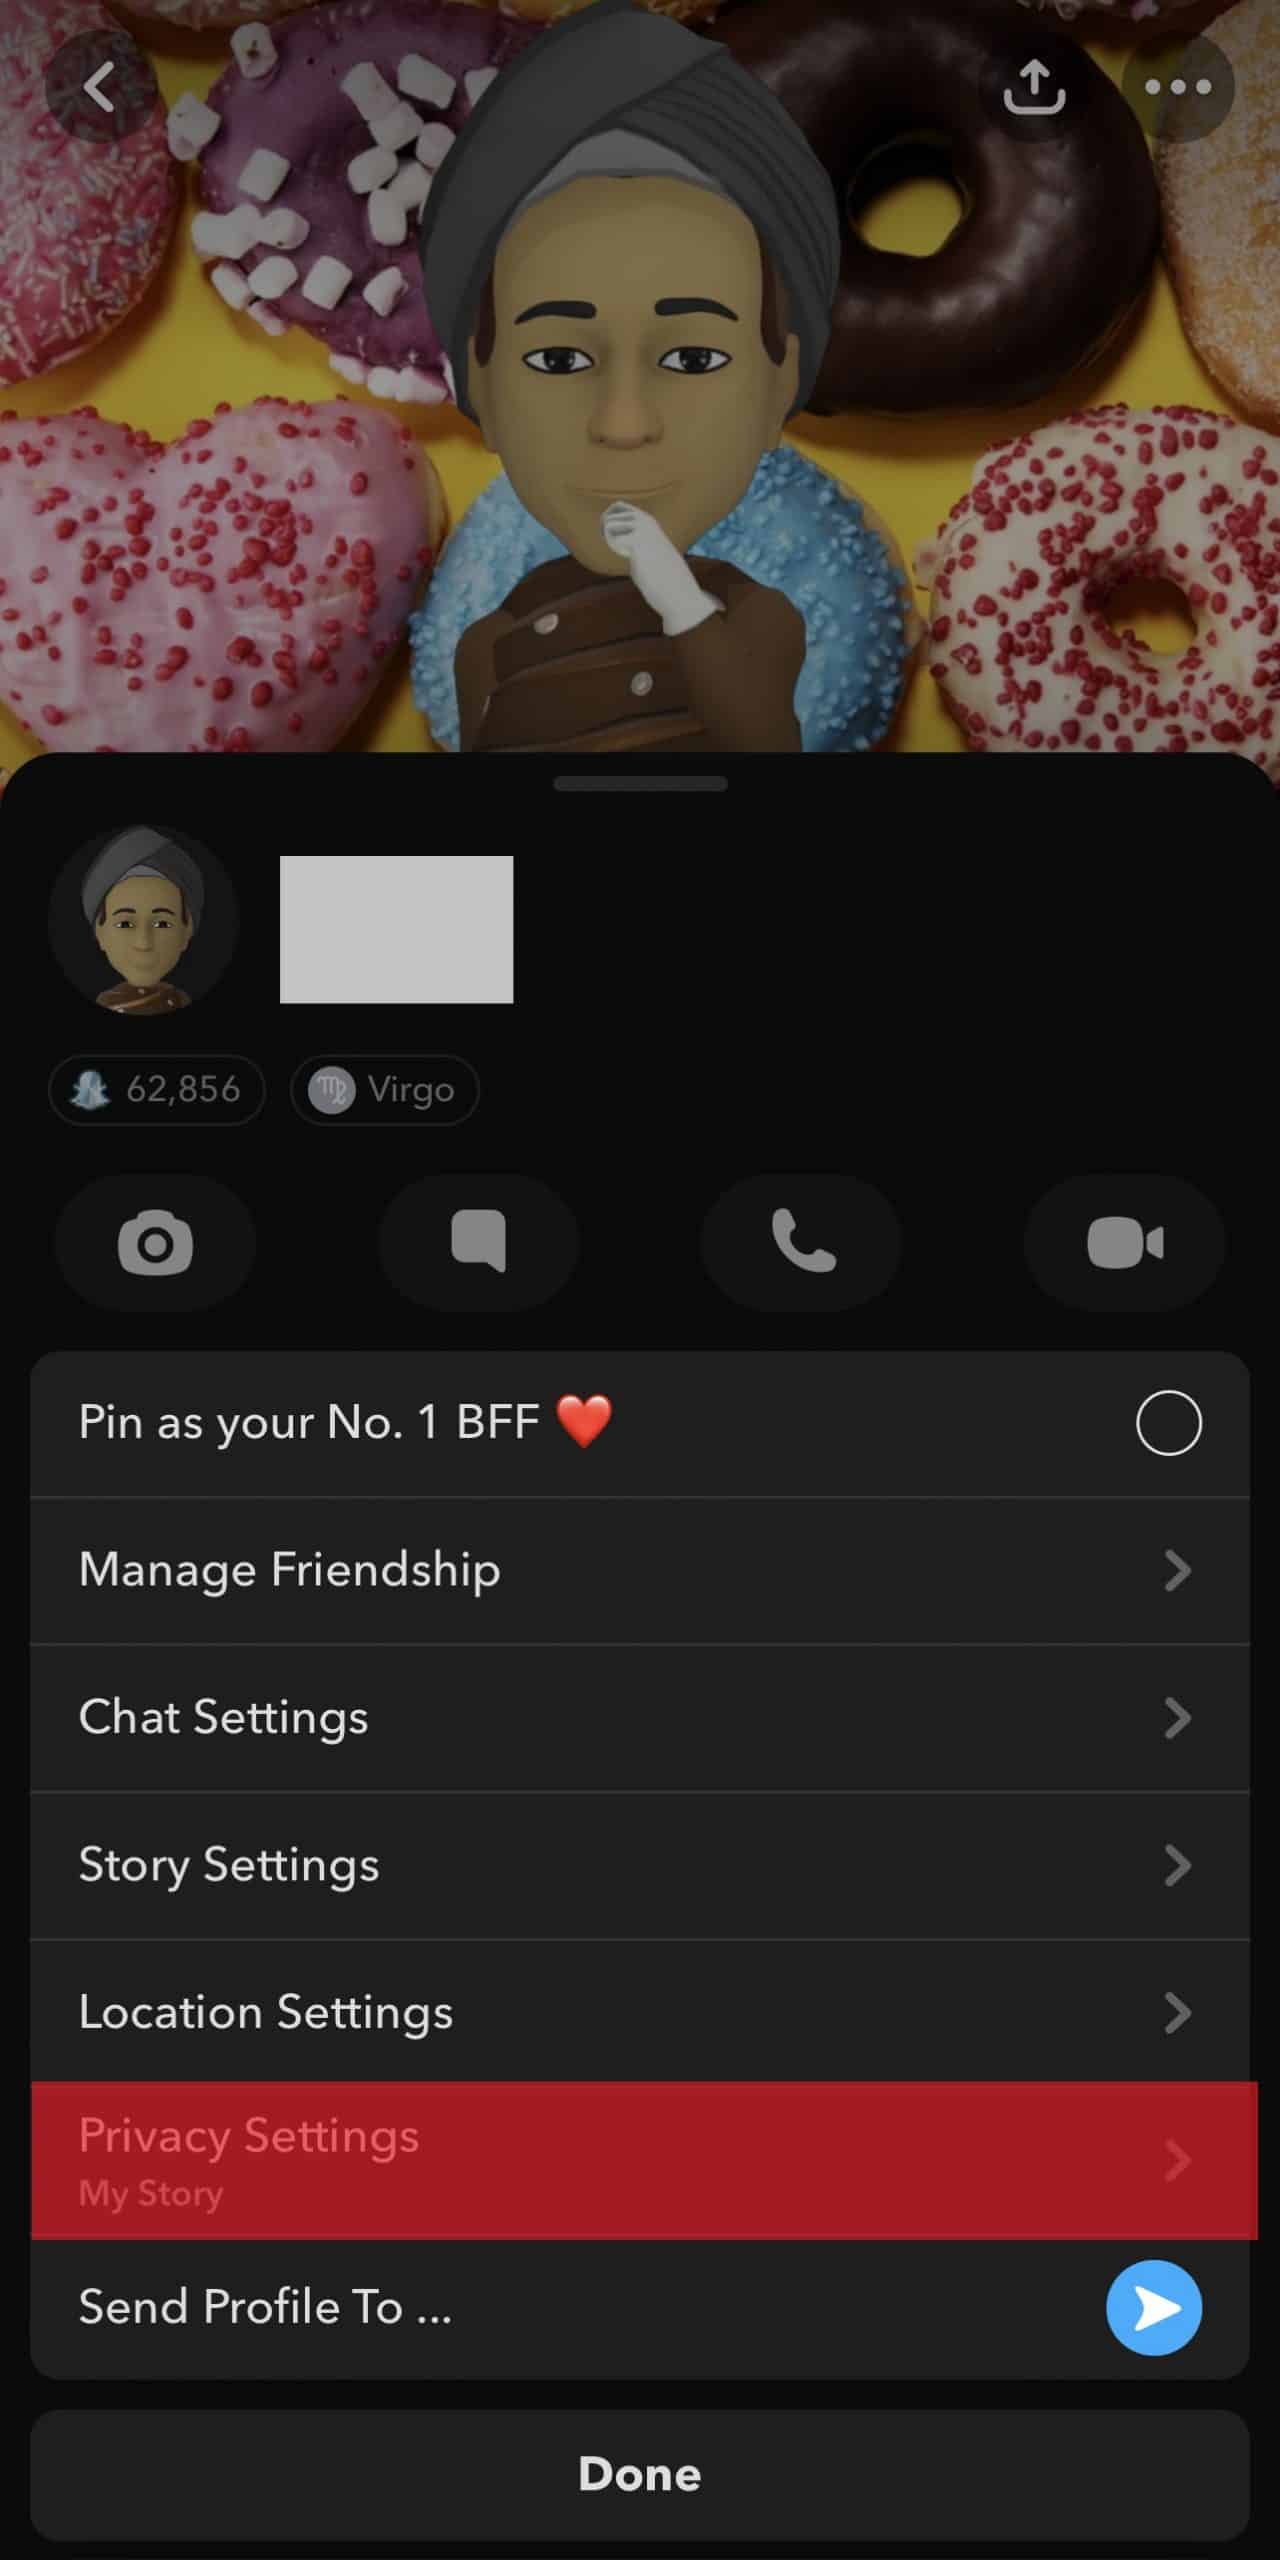 Privacy Settings On Snapchat Friend's Profile